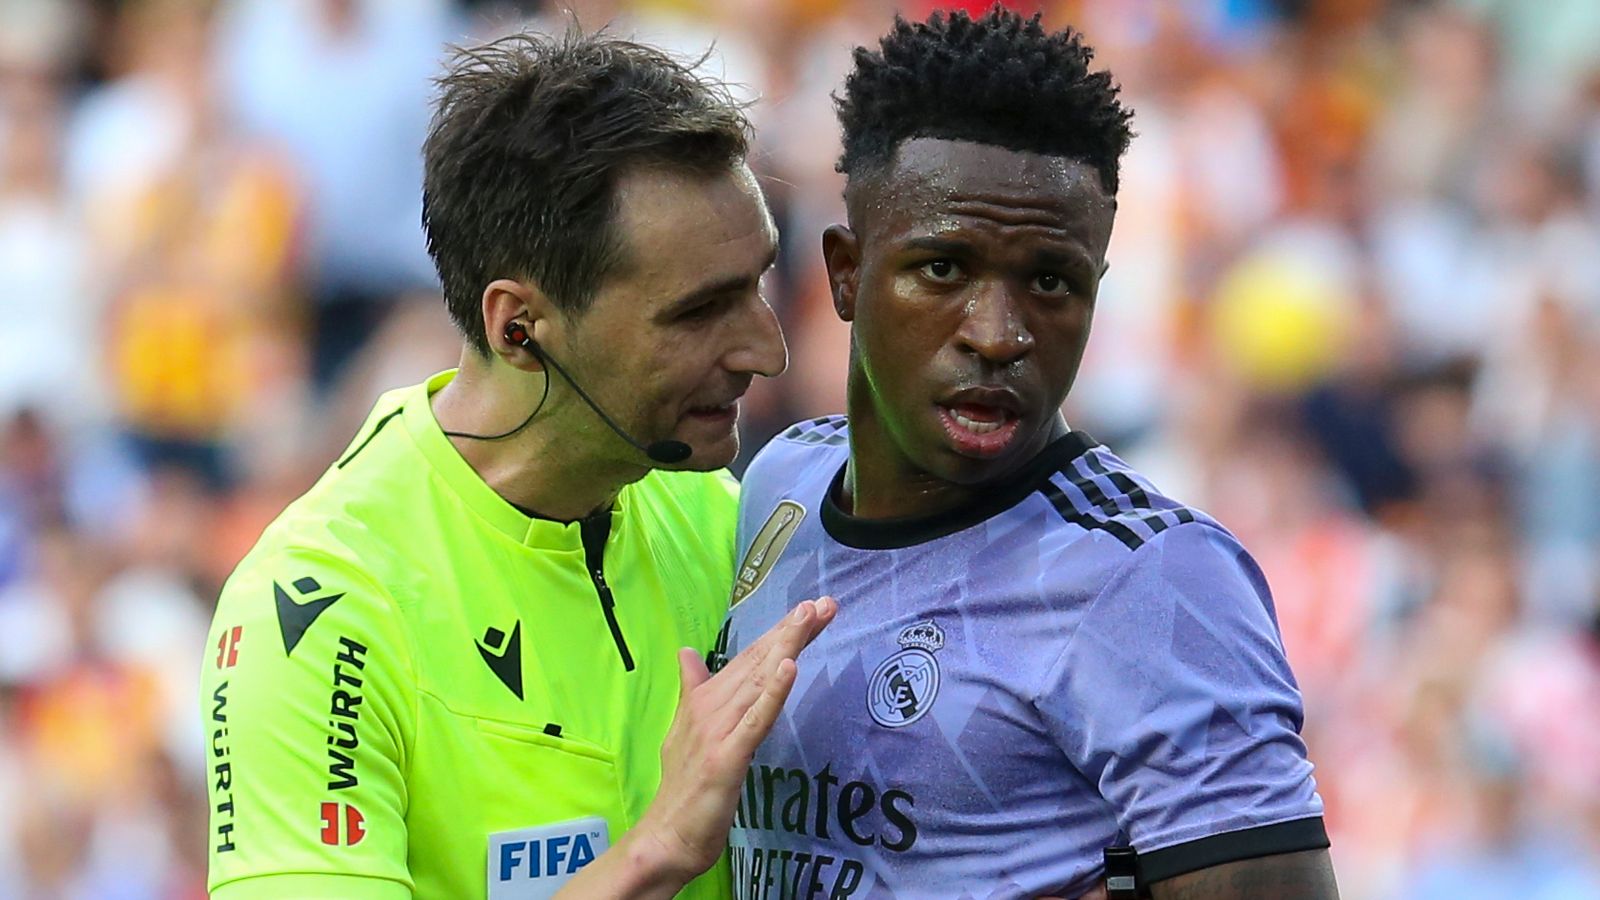 Vinicius Jr racist abuse: Valencia to appeal against five-game stand closure as Real Madrid player has red card overturned